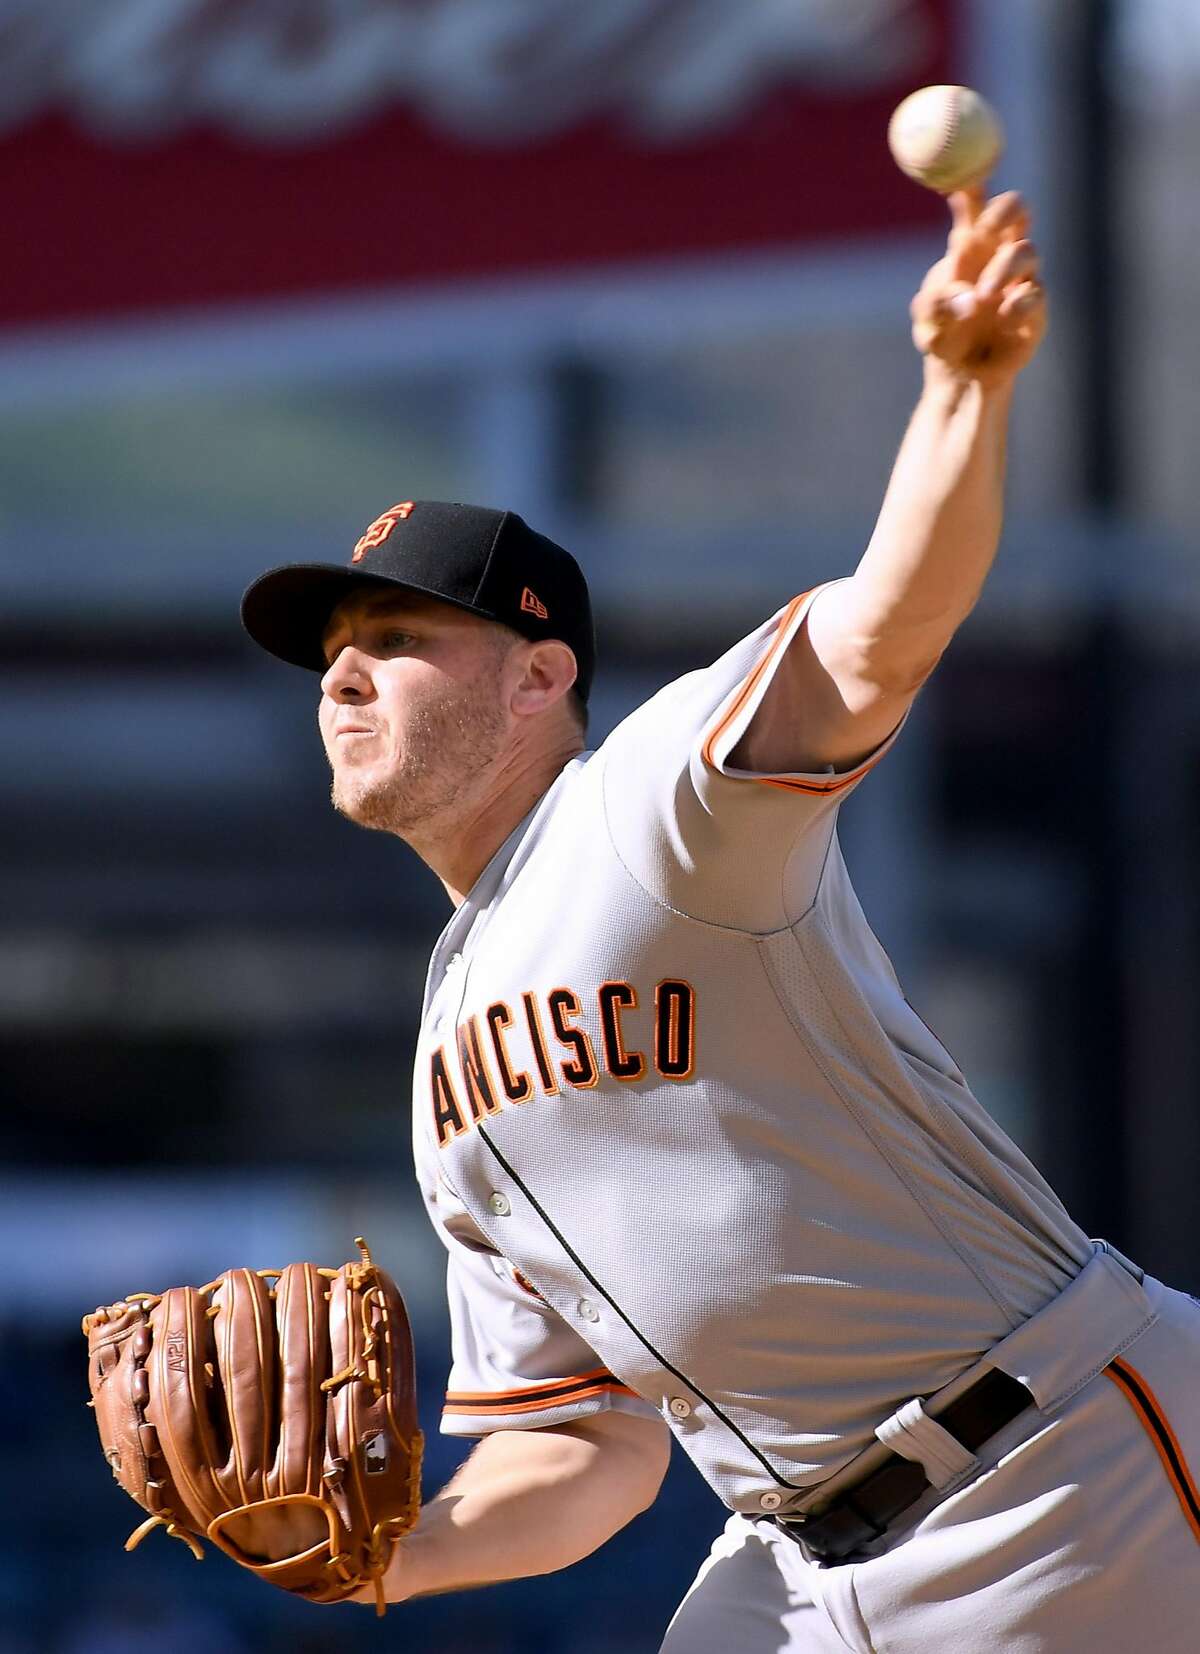 Ty Blach #50 of the San Francisco Giants pitches during the first inning against the Los Angeles Dodgers during the 2018 Major League Baseball opening day at Dodger Stadium on March 29, 2018 in Los Angeles, California.